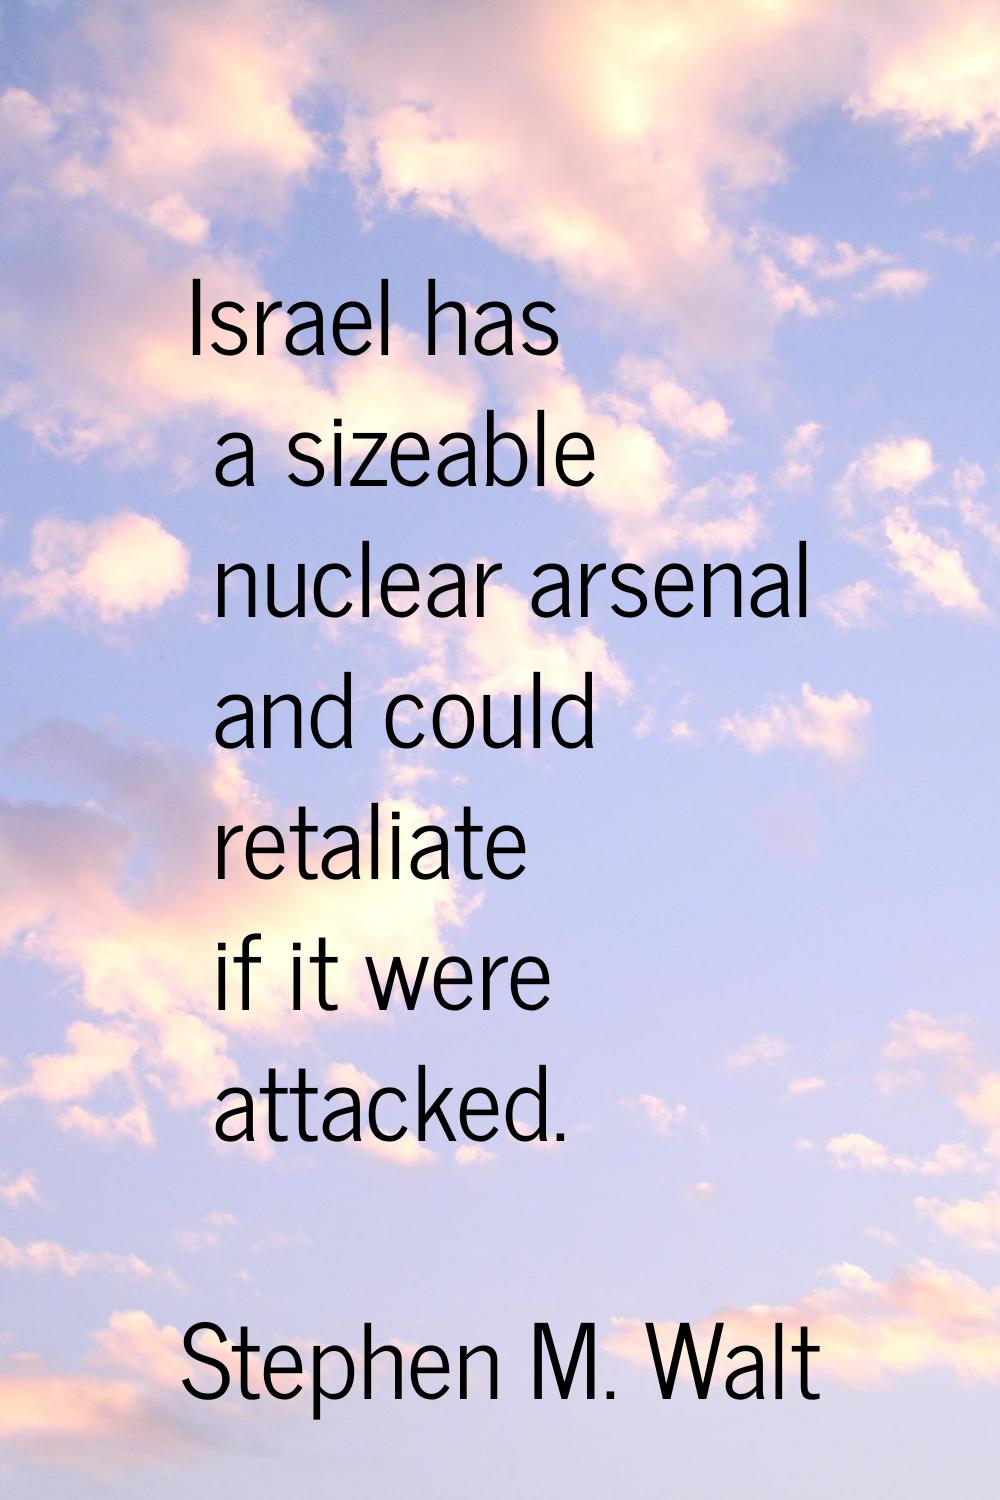 Israel has a sizeable nuclear arsenal and could retaliate if it were attacked.